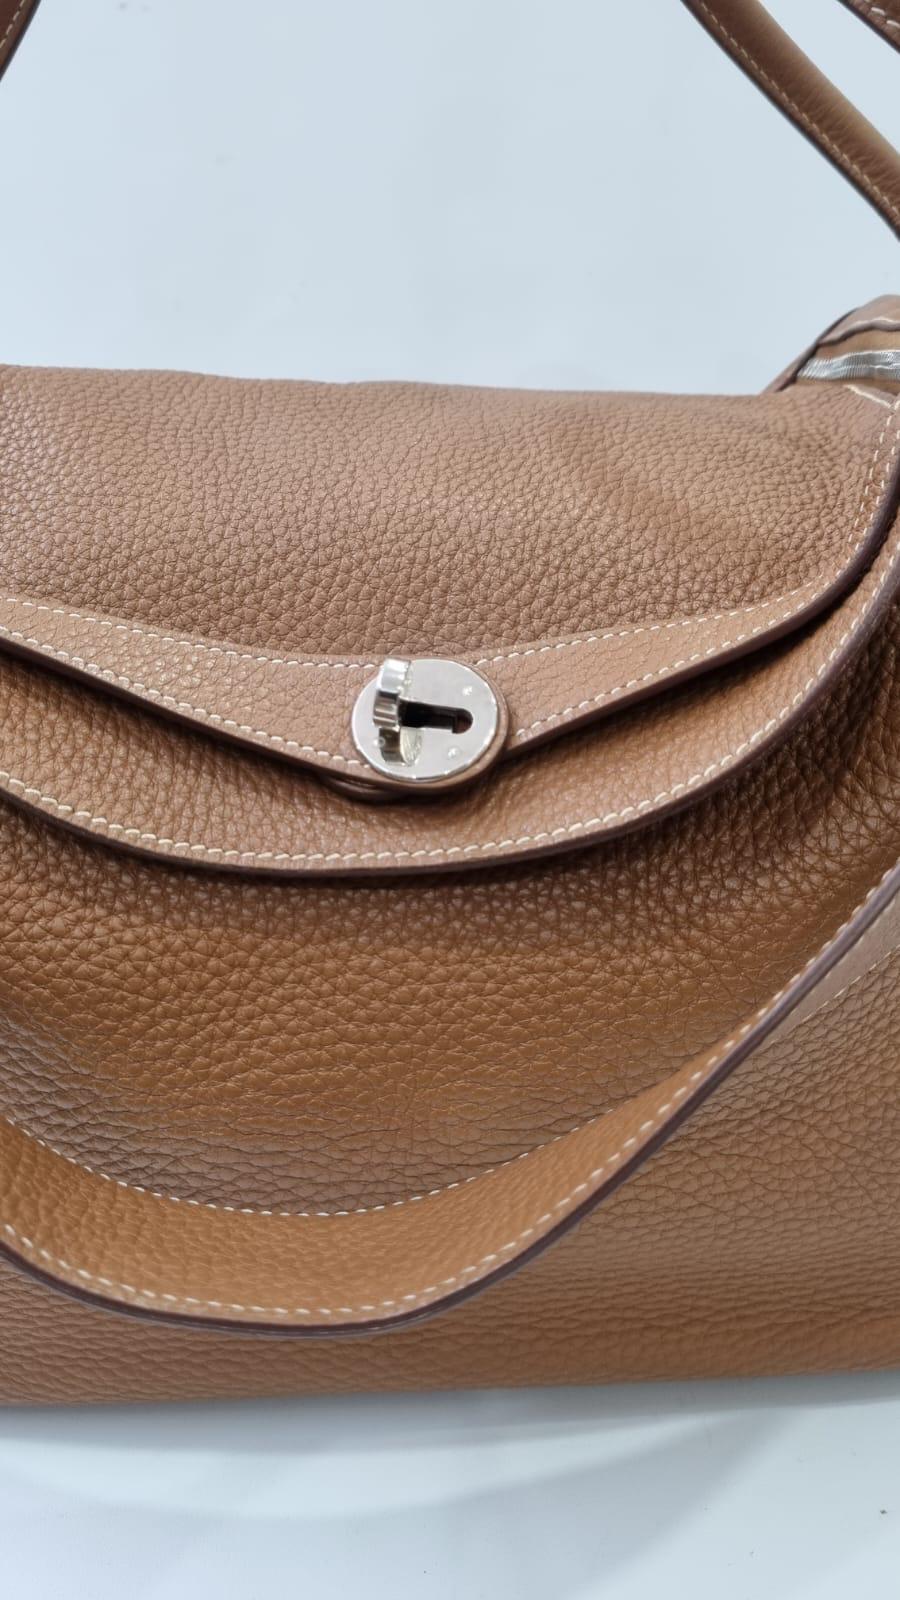 Classic lindy 34 in gold clemence with palladium hardware. Perfect everyday bag. Great condition overall, minor scratches and creasing due to the shape of the bag. Minor pen marks on the leather lining. Stamp square L (2008). Comes with dust bag.